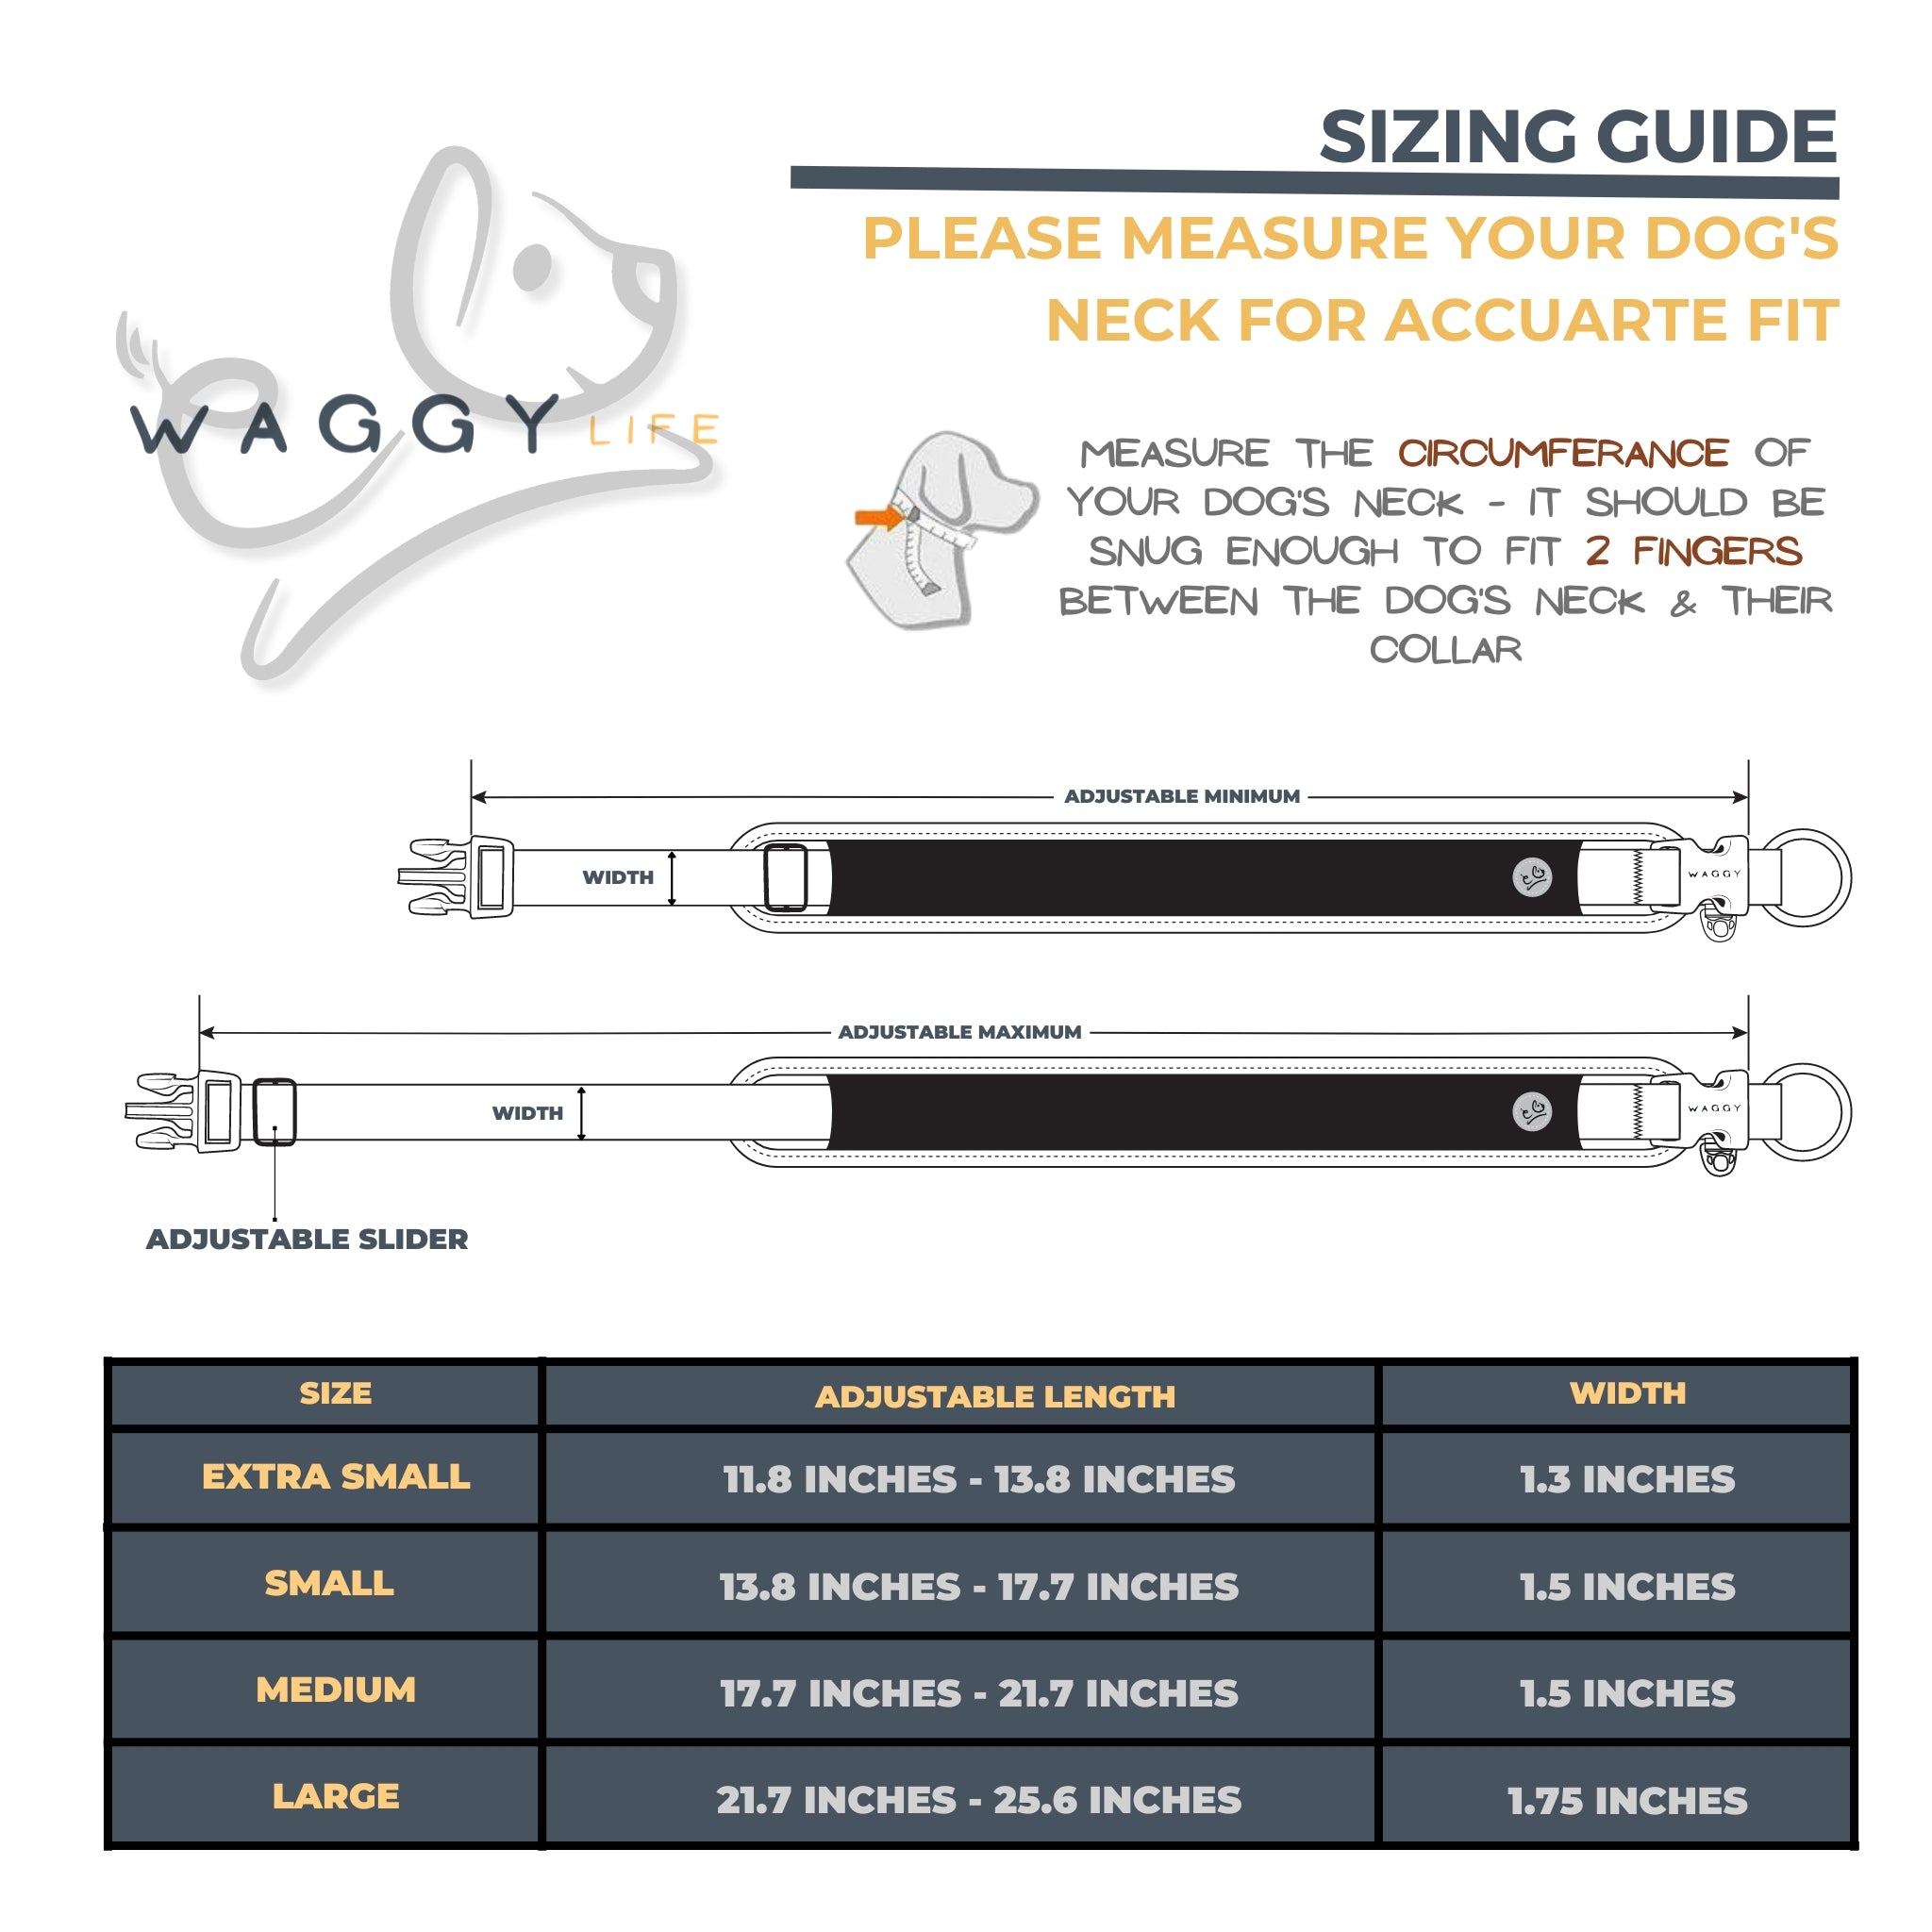 Waggy Air Mesh dog collar sizing guide details.  Air Mesh dog collar illustration showing adjustable minimum/maximum and adjustable slider. Measure the circumference of your dog&#39;s neck for accurate fit.